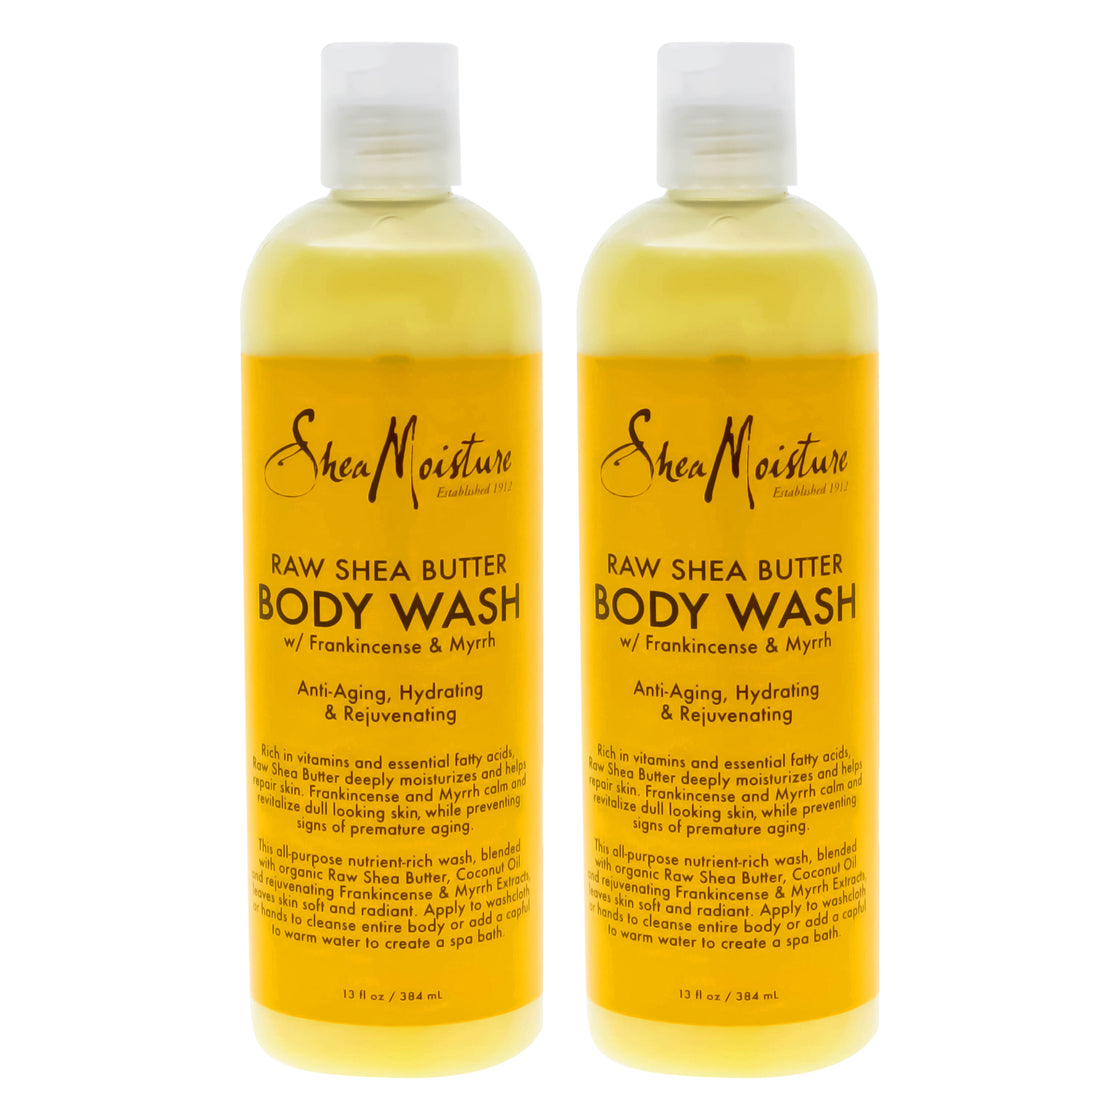 Raw Shea Butter Body Wash by Shea Moisture for Unisex - 13 oz Body Wash - Pack of 2